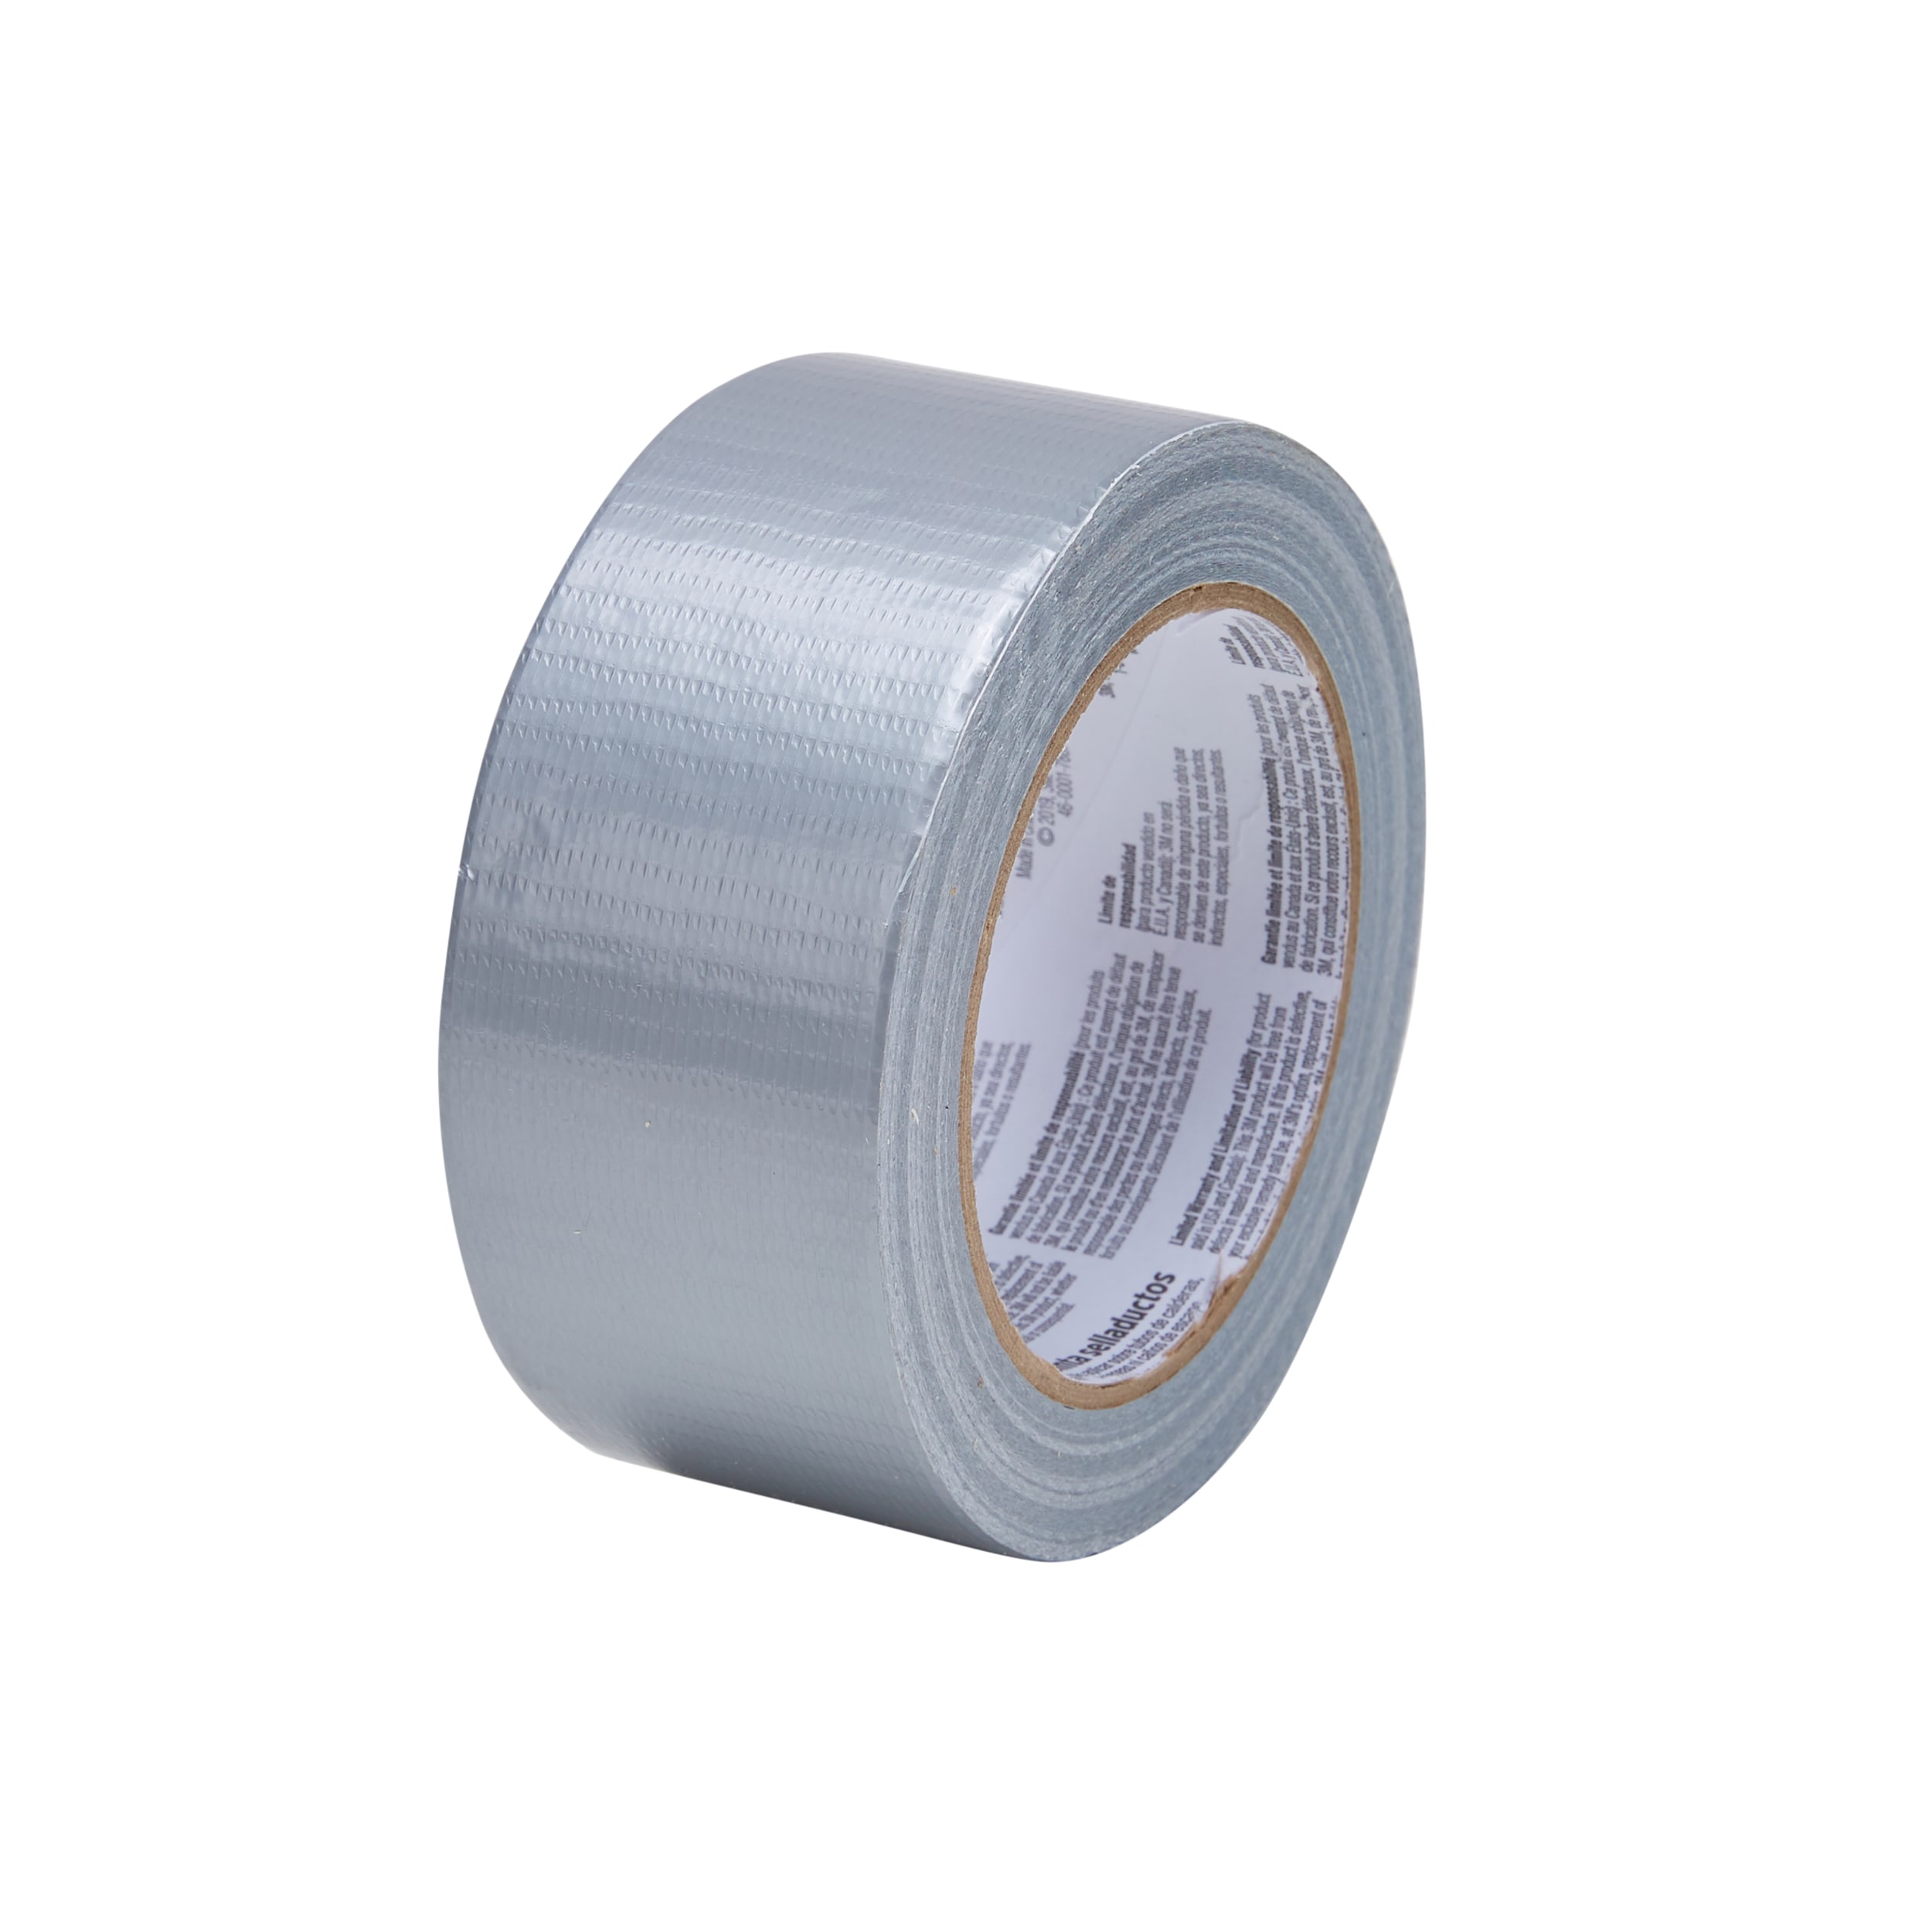 K Tool 73560 Duct Tape, 2 x 60 Yards, All Purpose, Gray, Sold